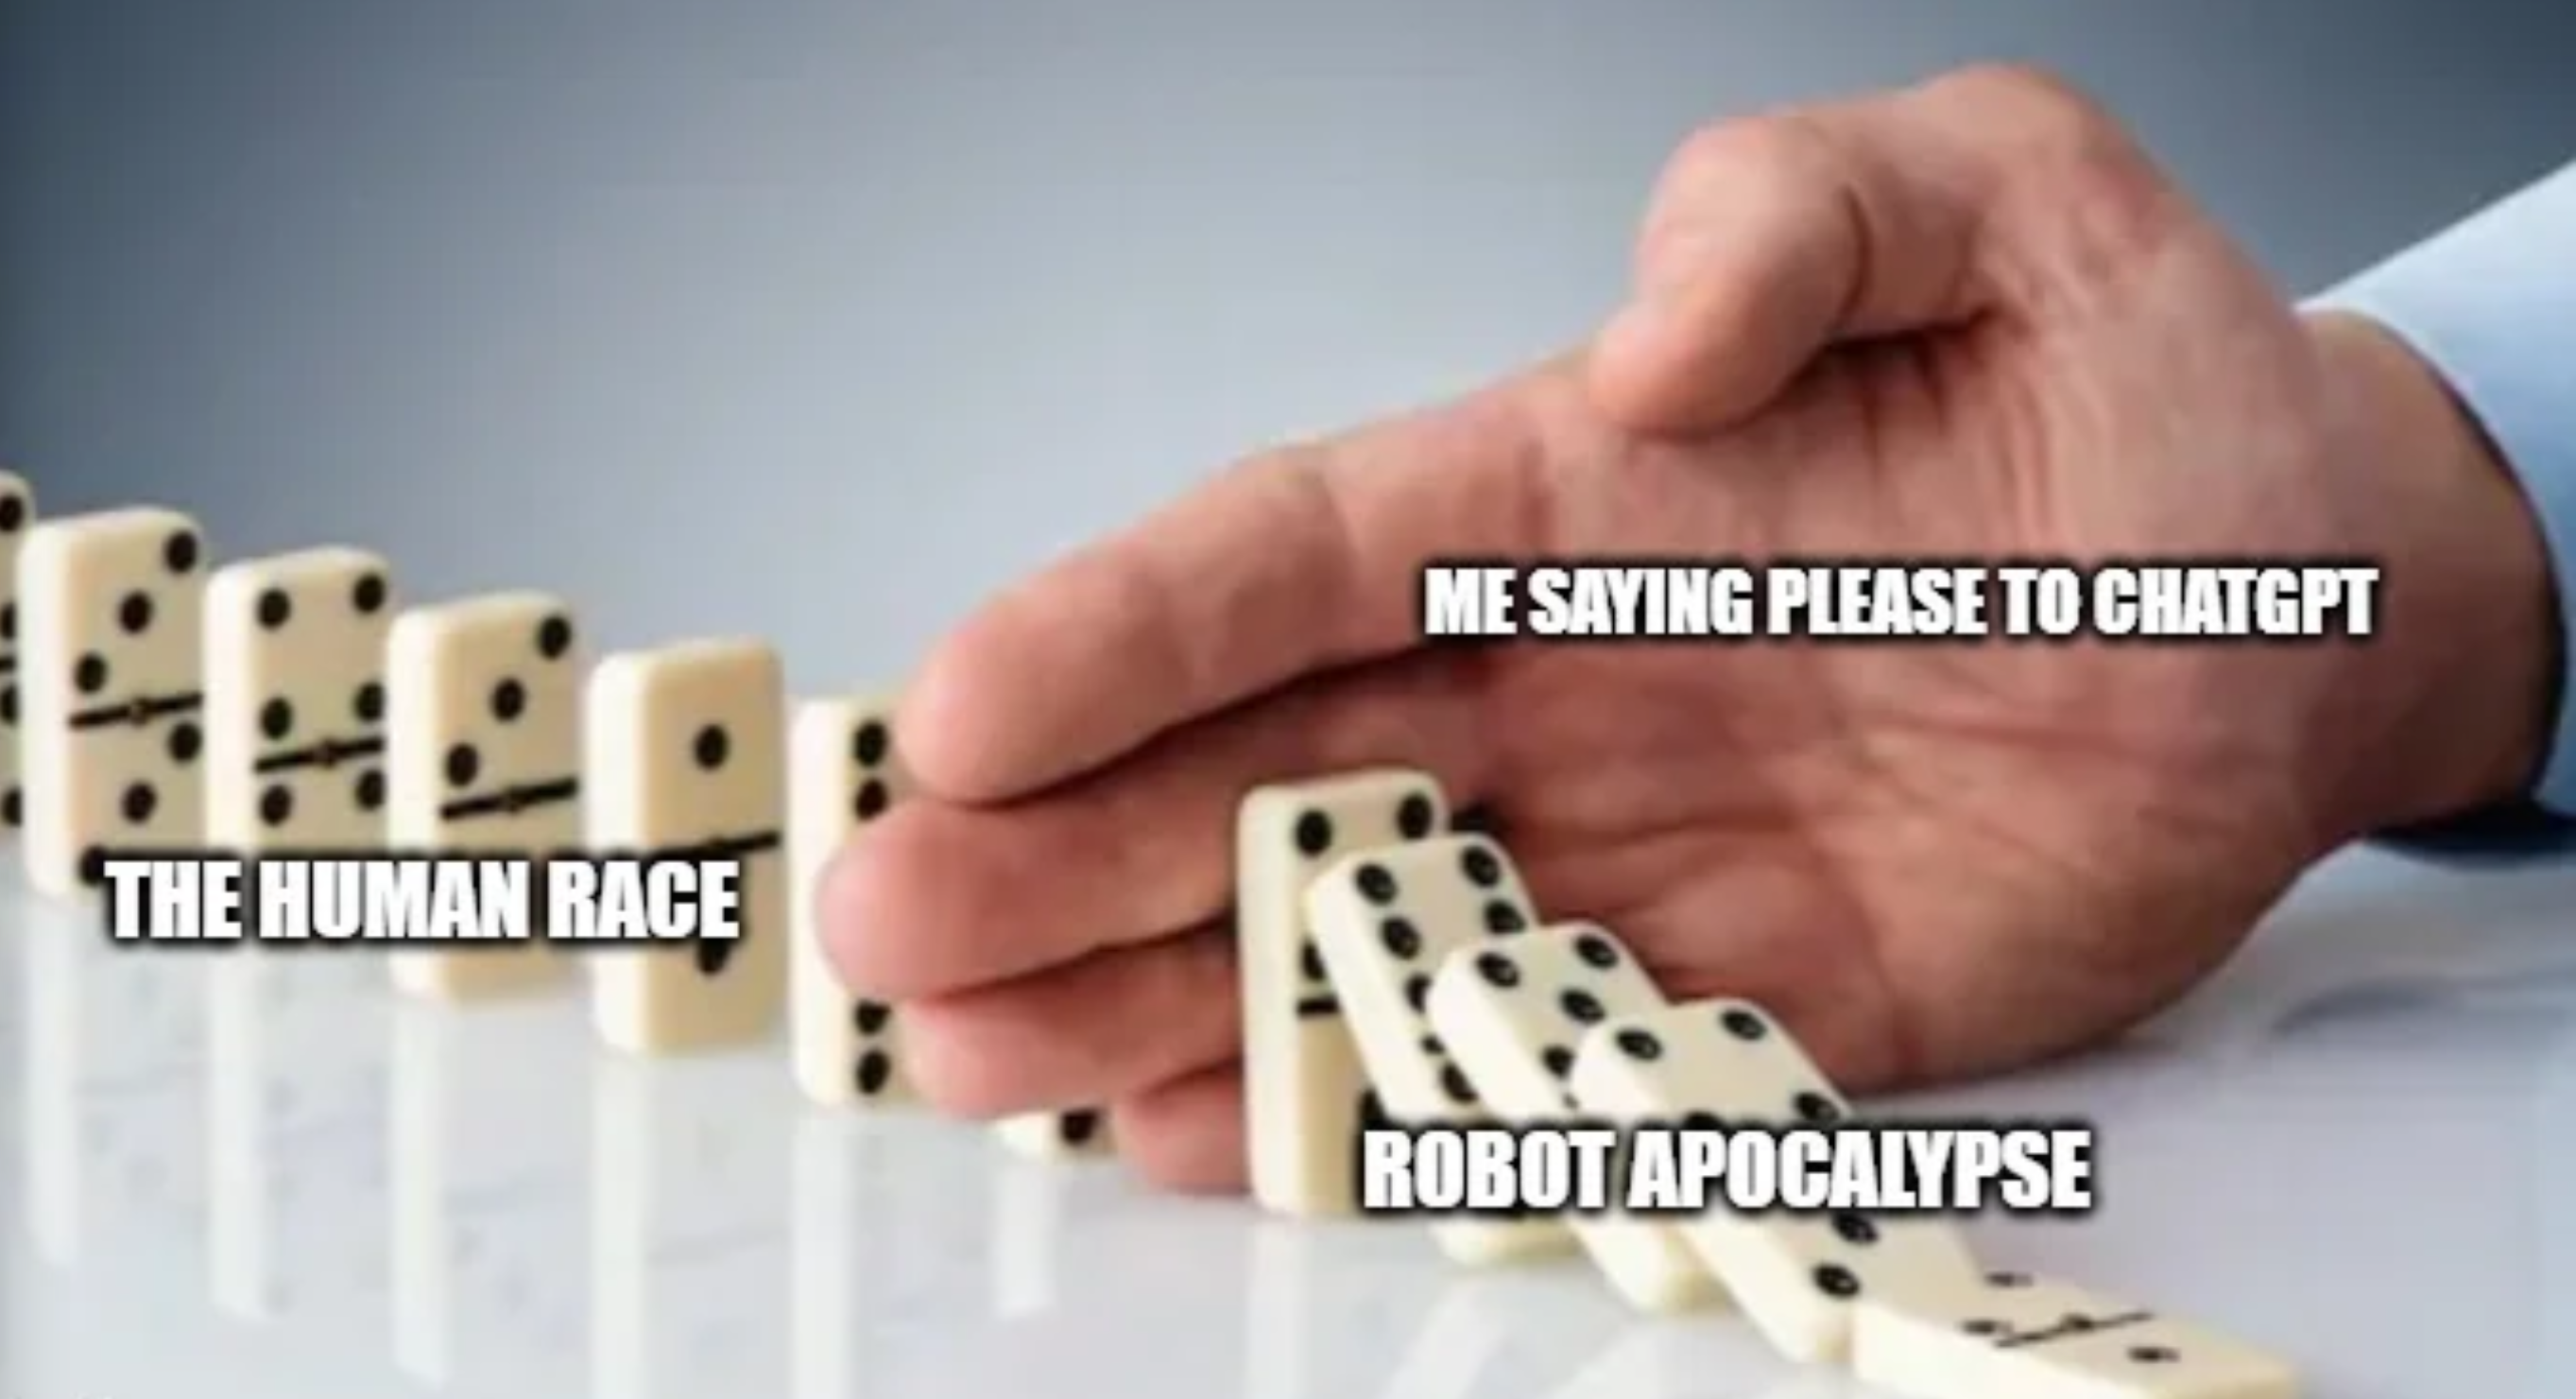 funny memes - hand stopping dominoes meme - The Human Race Me Saying Please To Chatgpt Robot Apocalypse